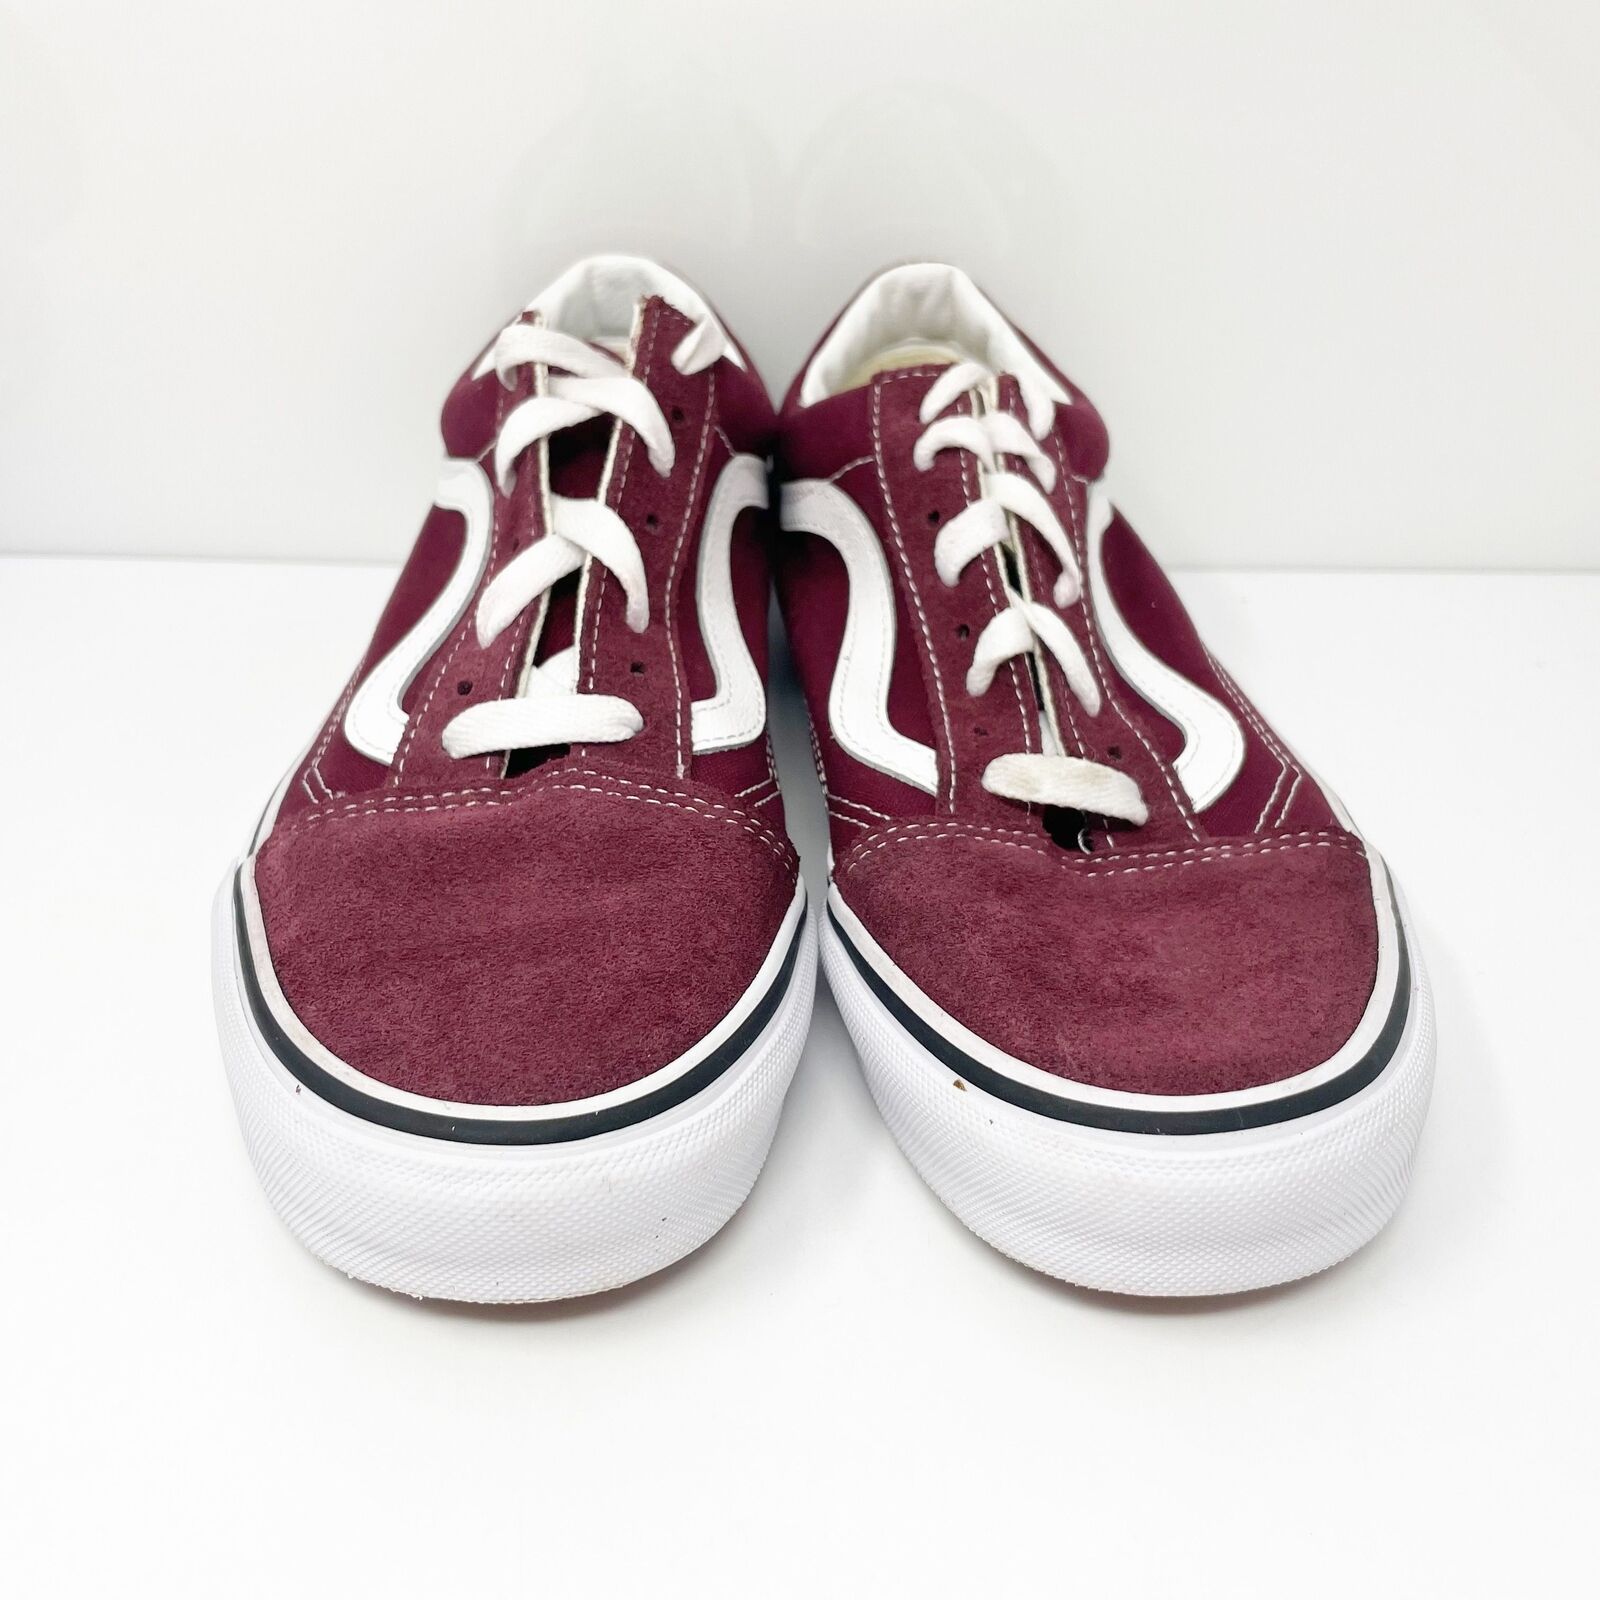 Vans Unisex Off The Wall 507698 Red Casual Shoes Sneakers Size M 7 W 8 ...